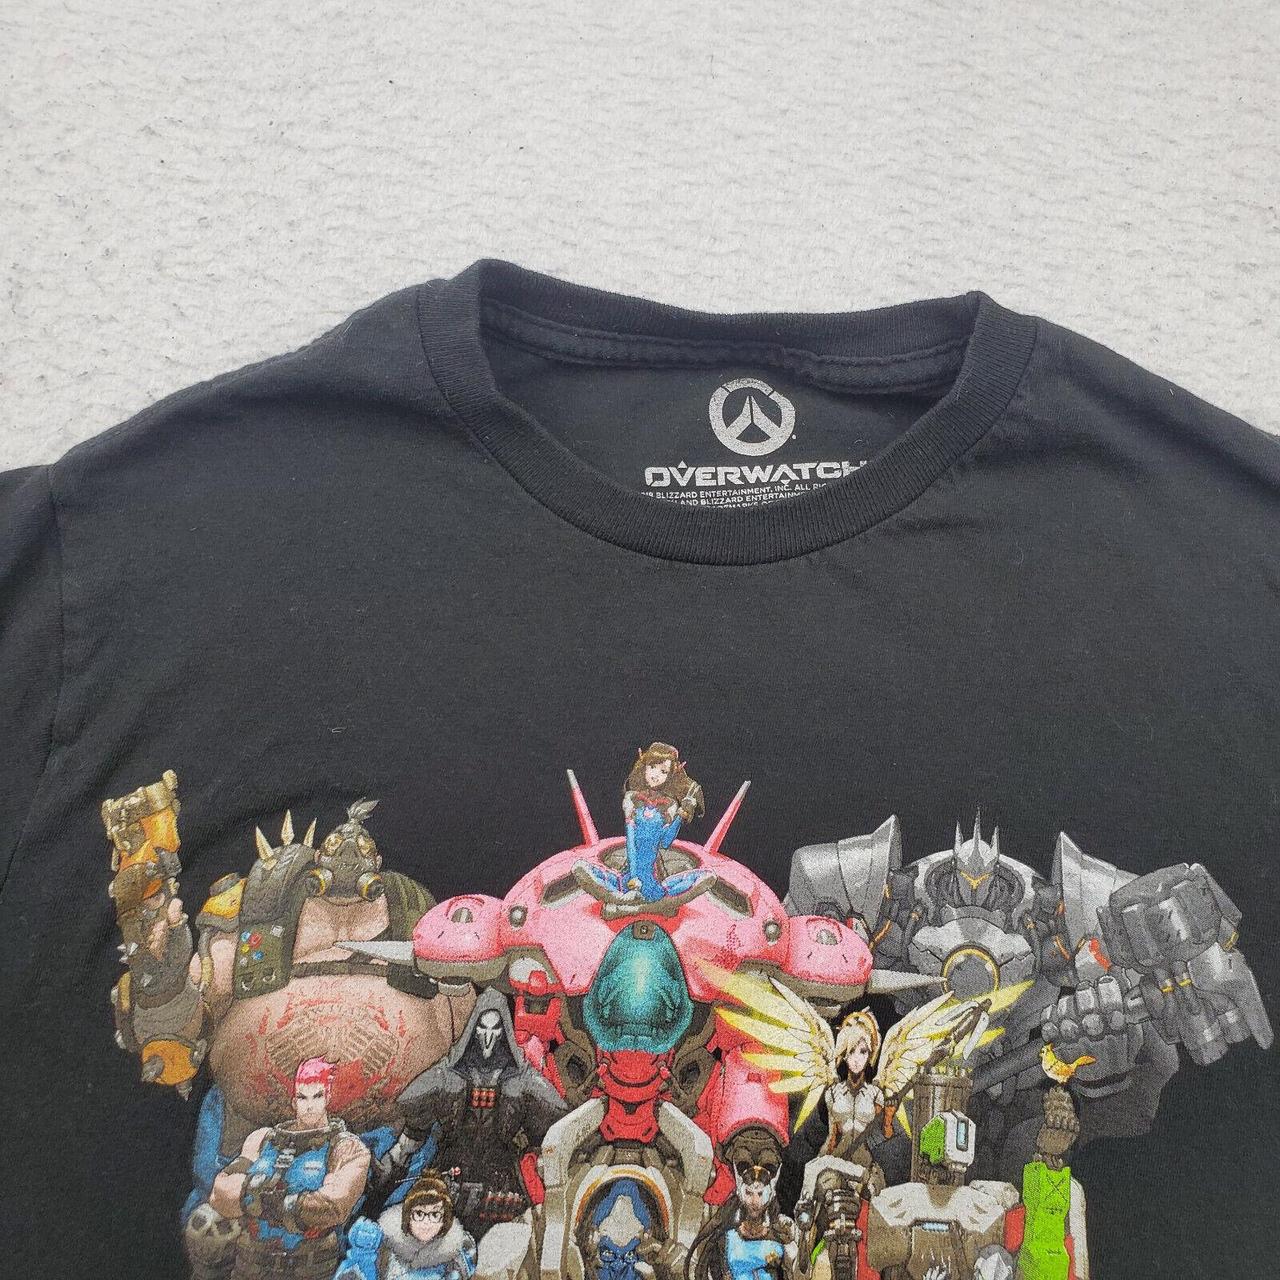 Overwatch Men's Black and Gold T-shirt (3)